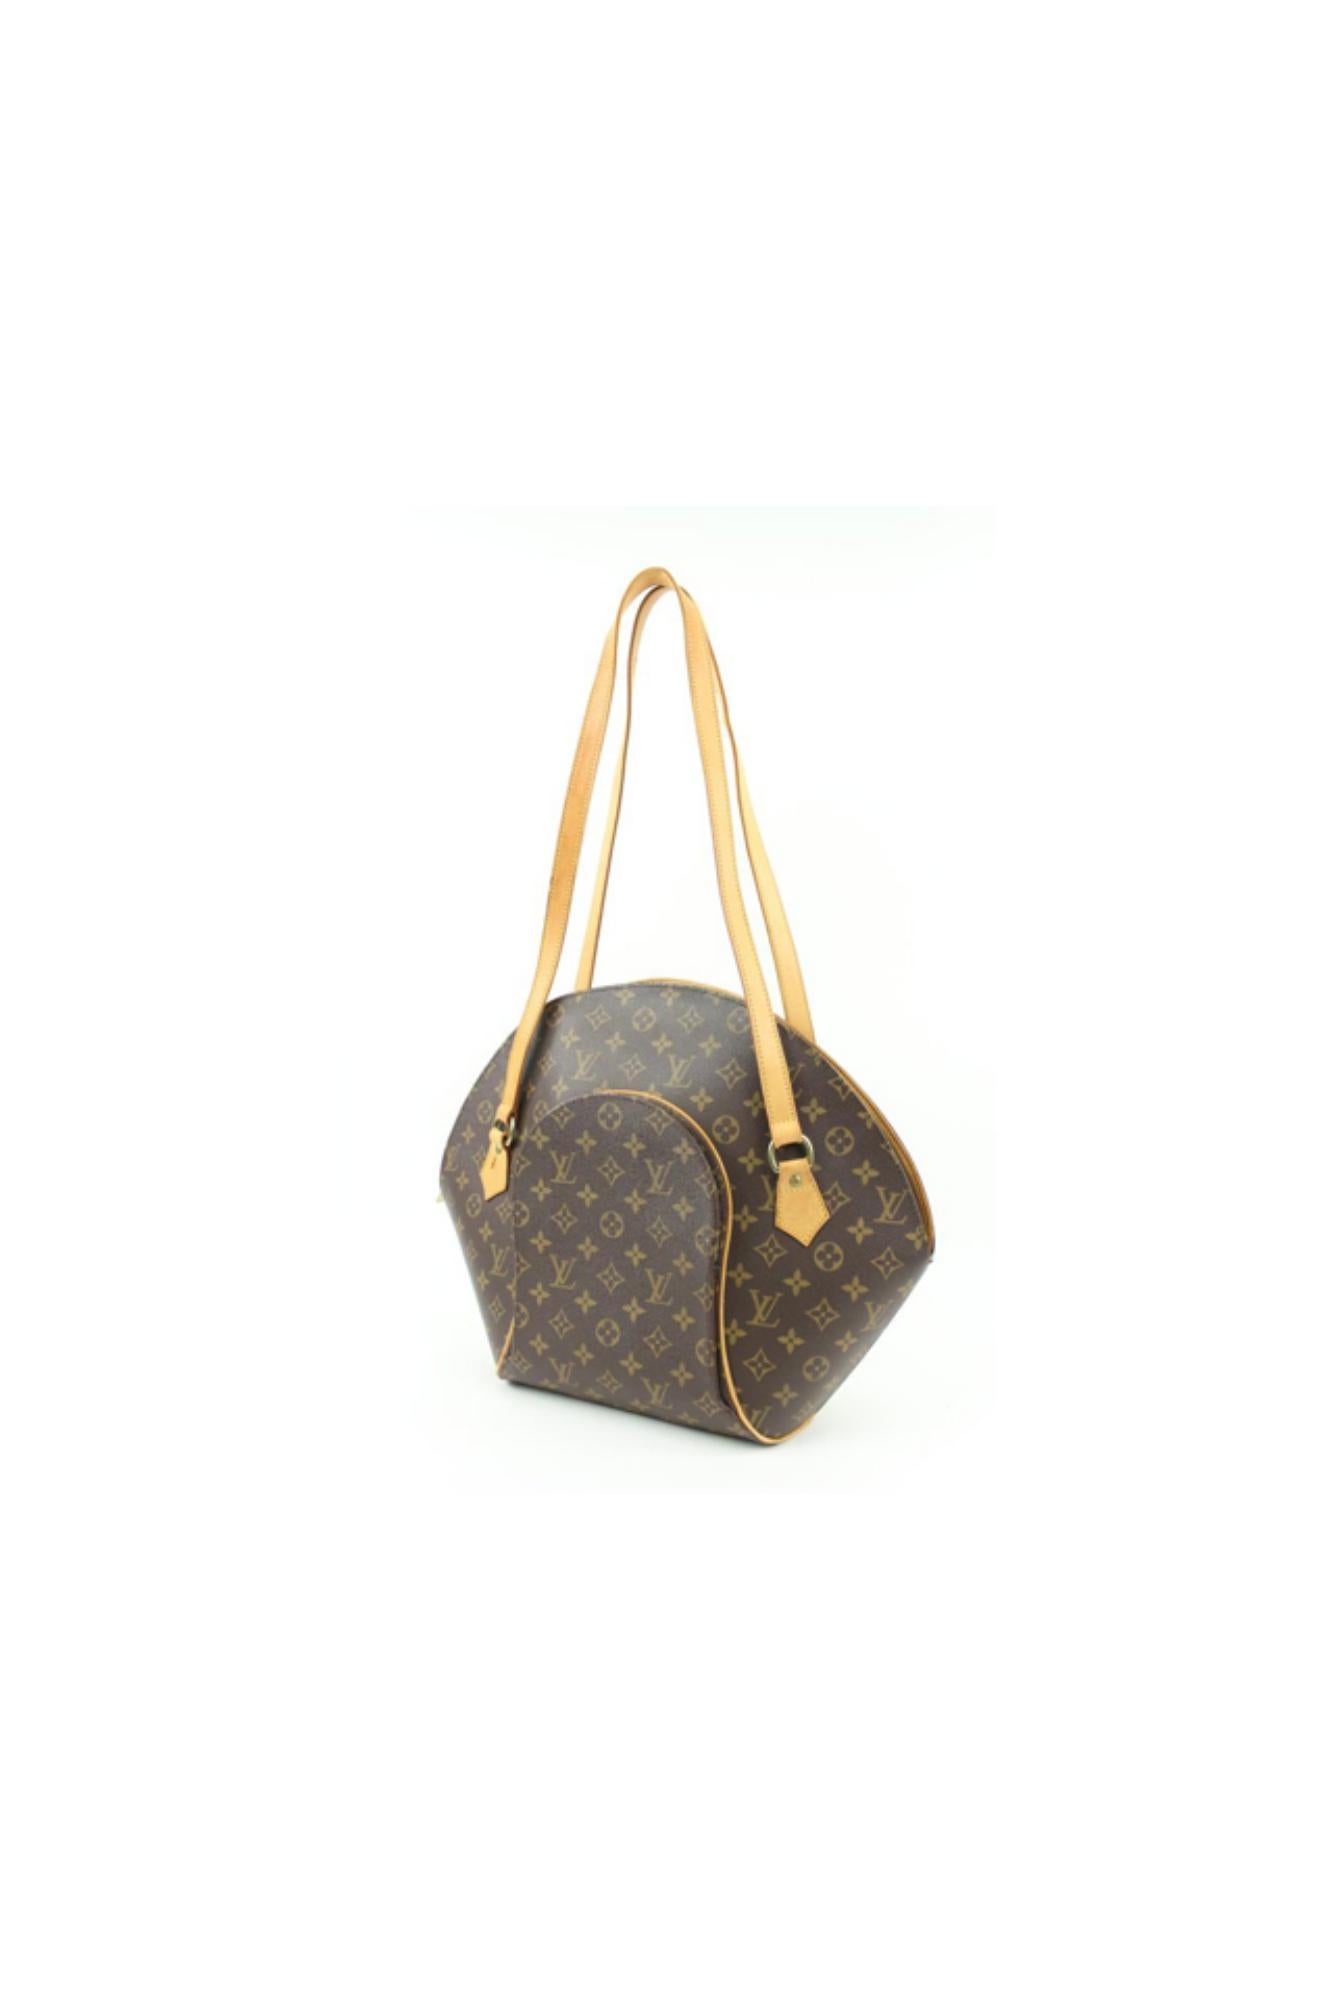 Louis Vuitton Discontinued Monogram Ellipse GM Shopping 67lv23s
Date Code/Serial Number: VI0928
Made In: France
Measurements: Length:  17.5